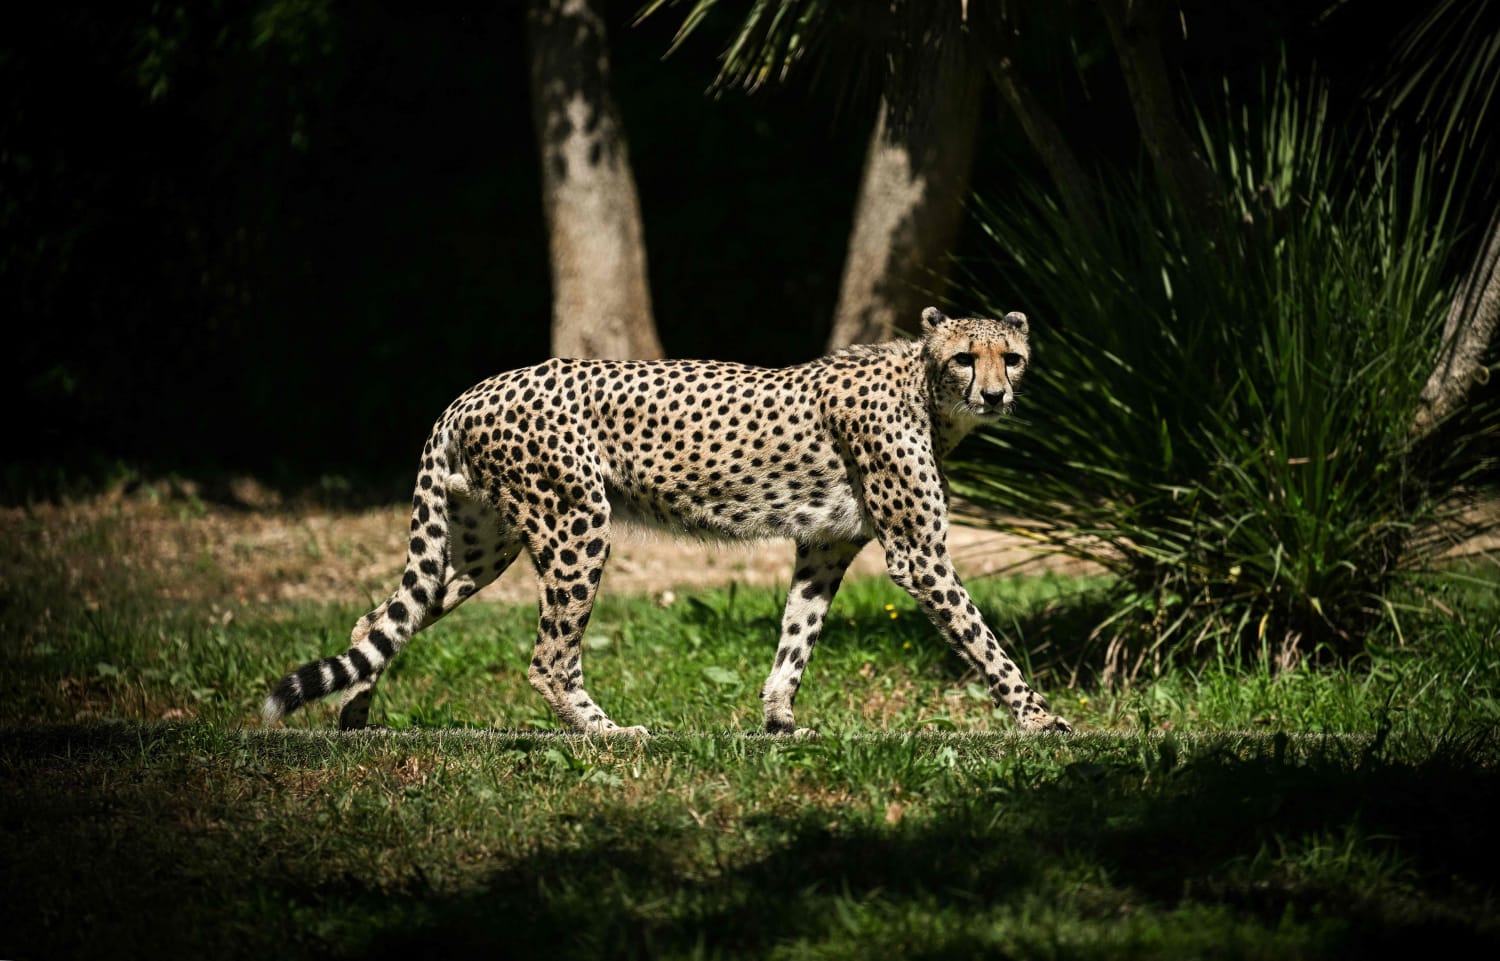 Wild cheetahs to prowl in India for first time in 70 years